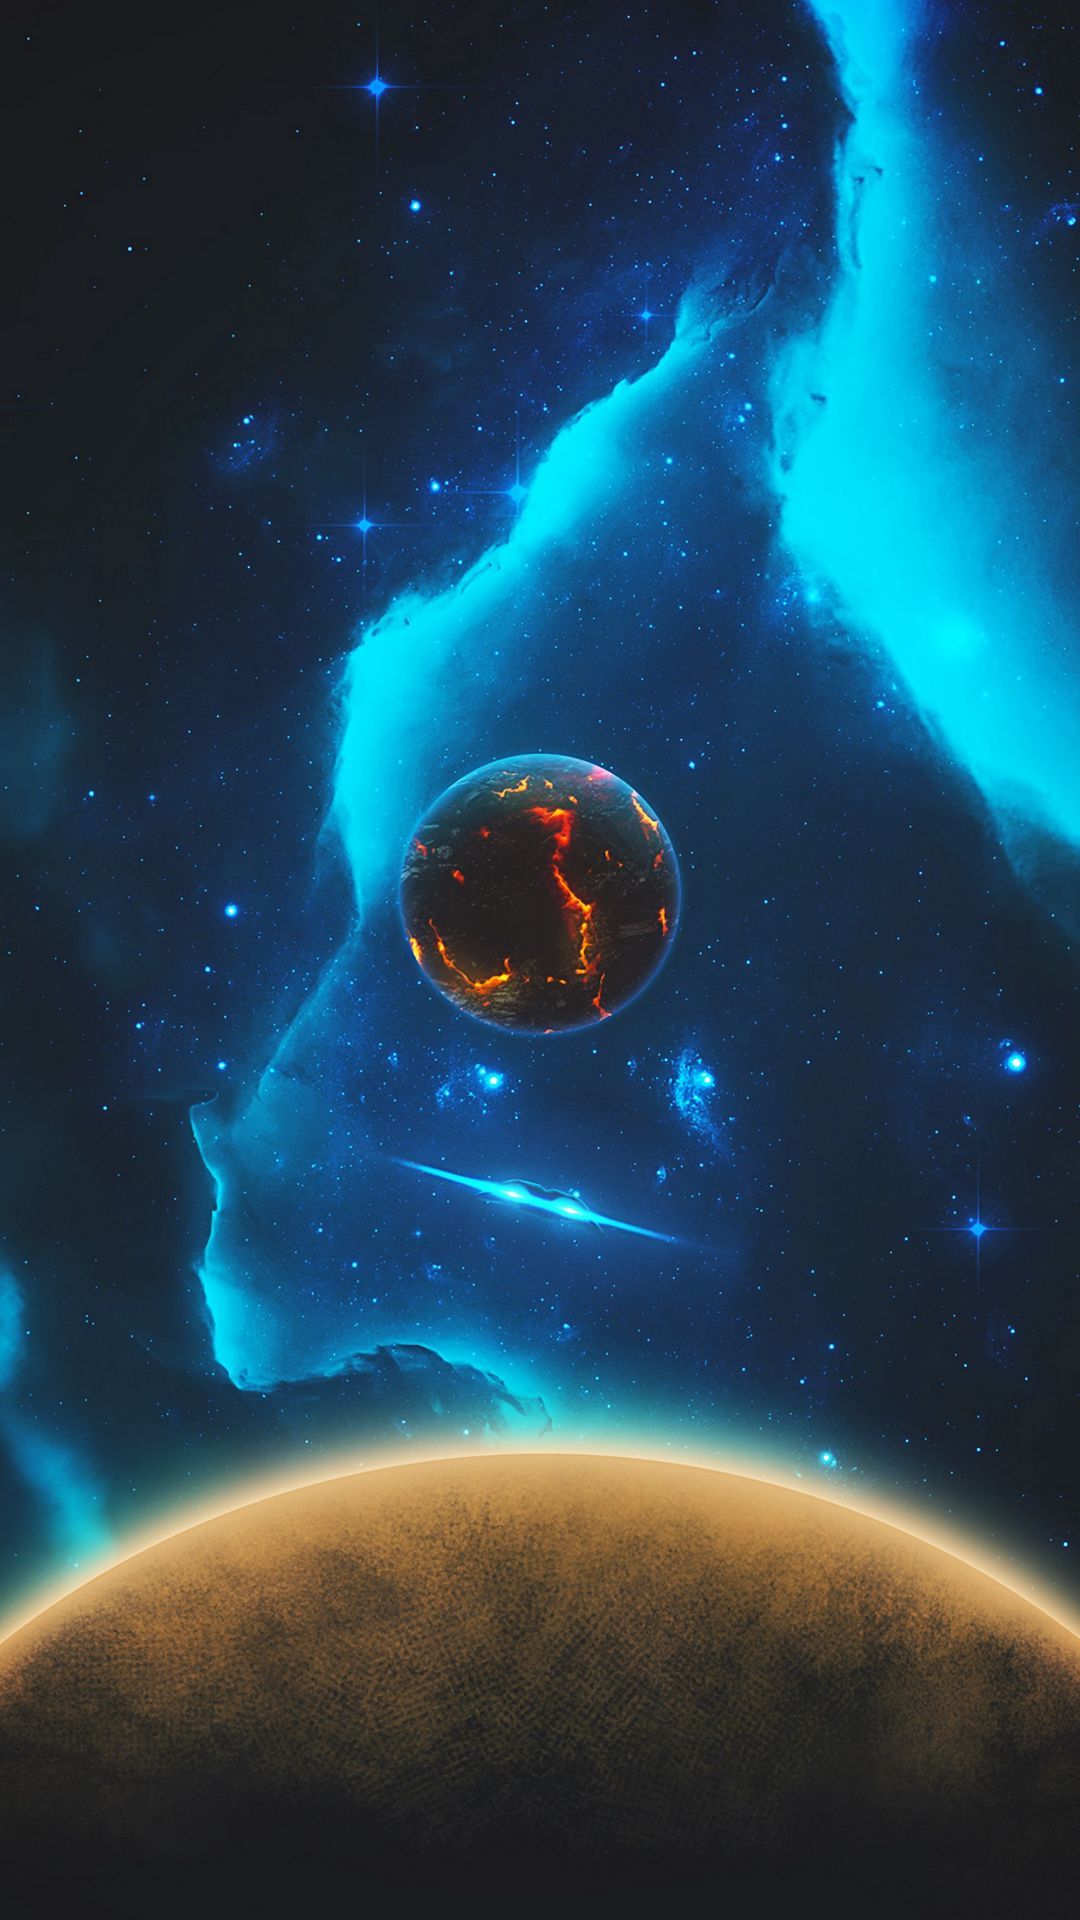 Space Themed Iphone Wallpapers